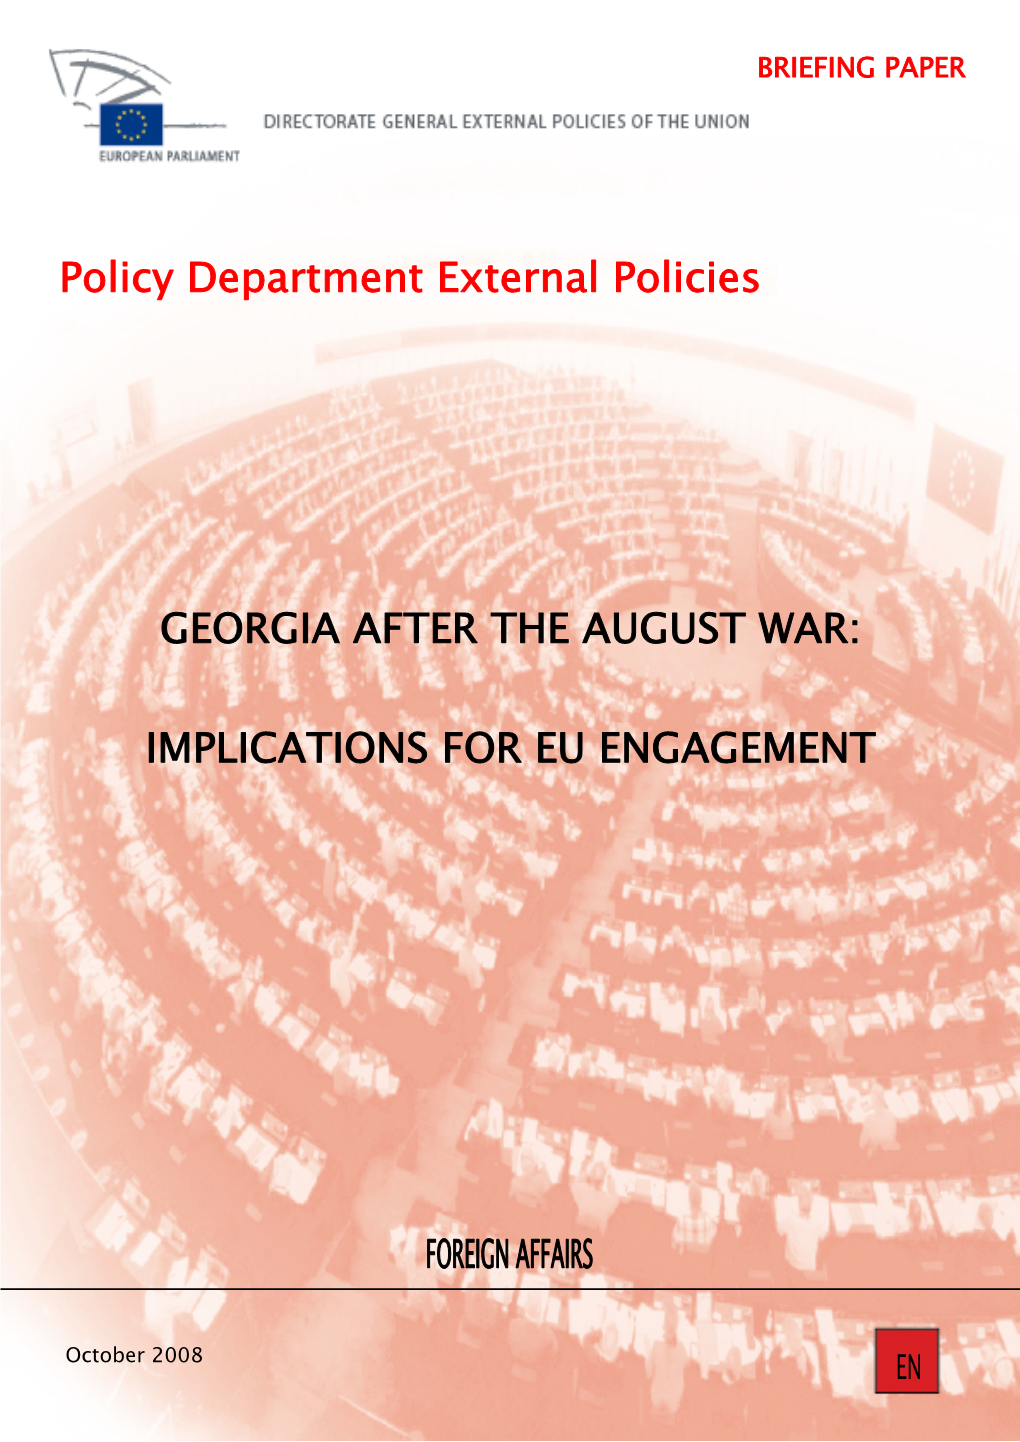 Policy Department External Policies GEORGIA AFTER the AUGUST WAR: IMPLICATIONS for EU ENGAGEMENT